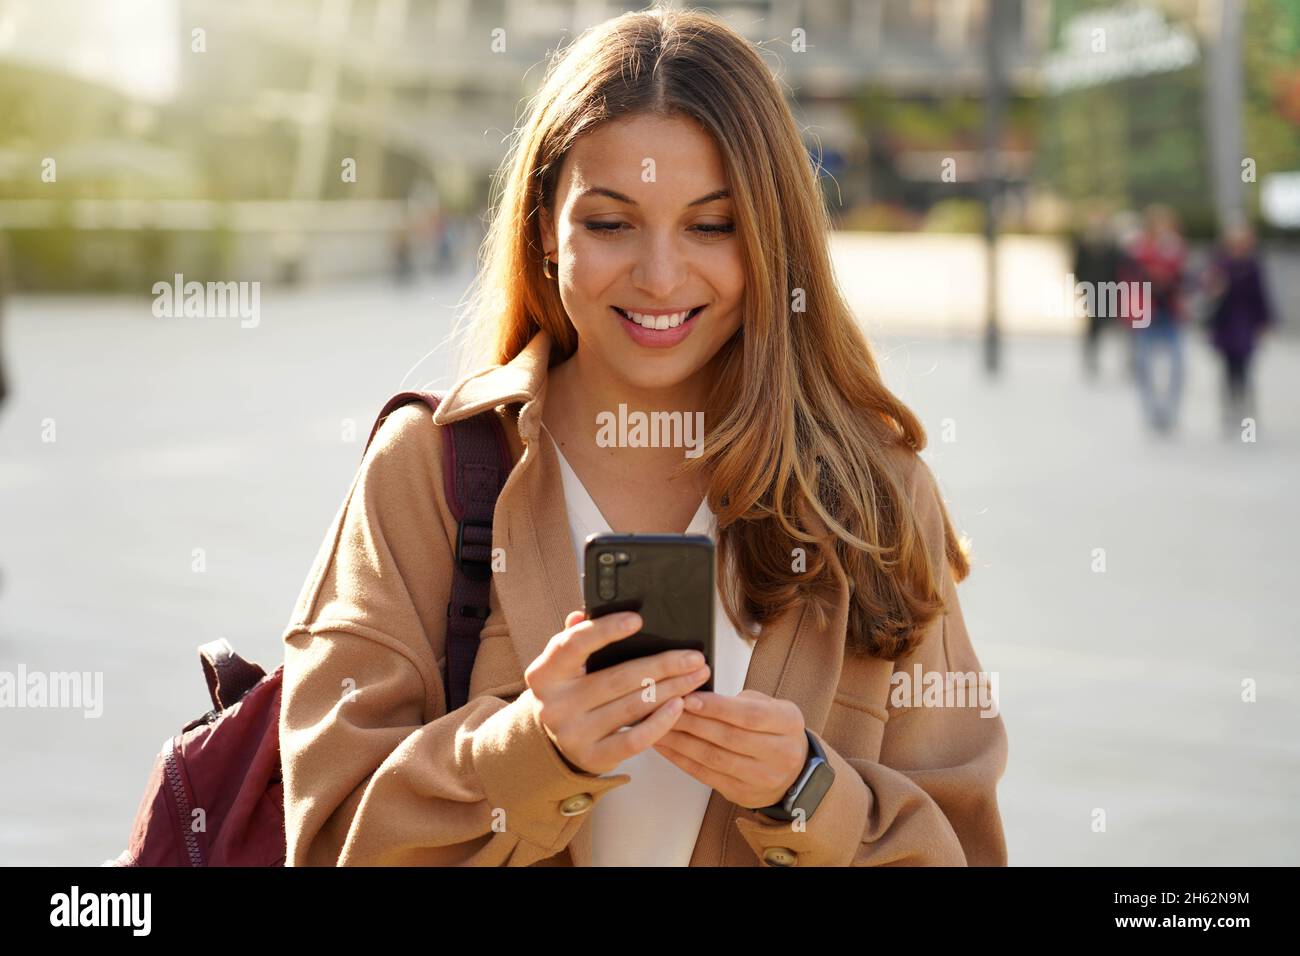 Young cheerful stylish woman using cell phone and texting message on city street. Beautiful happy casual girl holding smart phone in hands and smiling Stock Photo